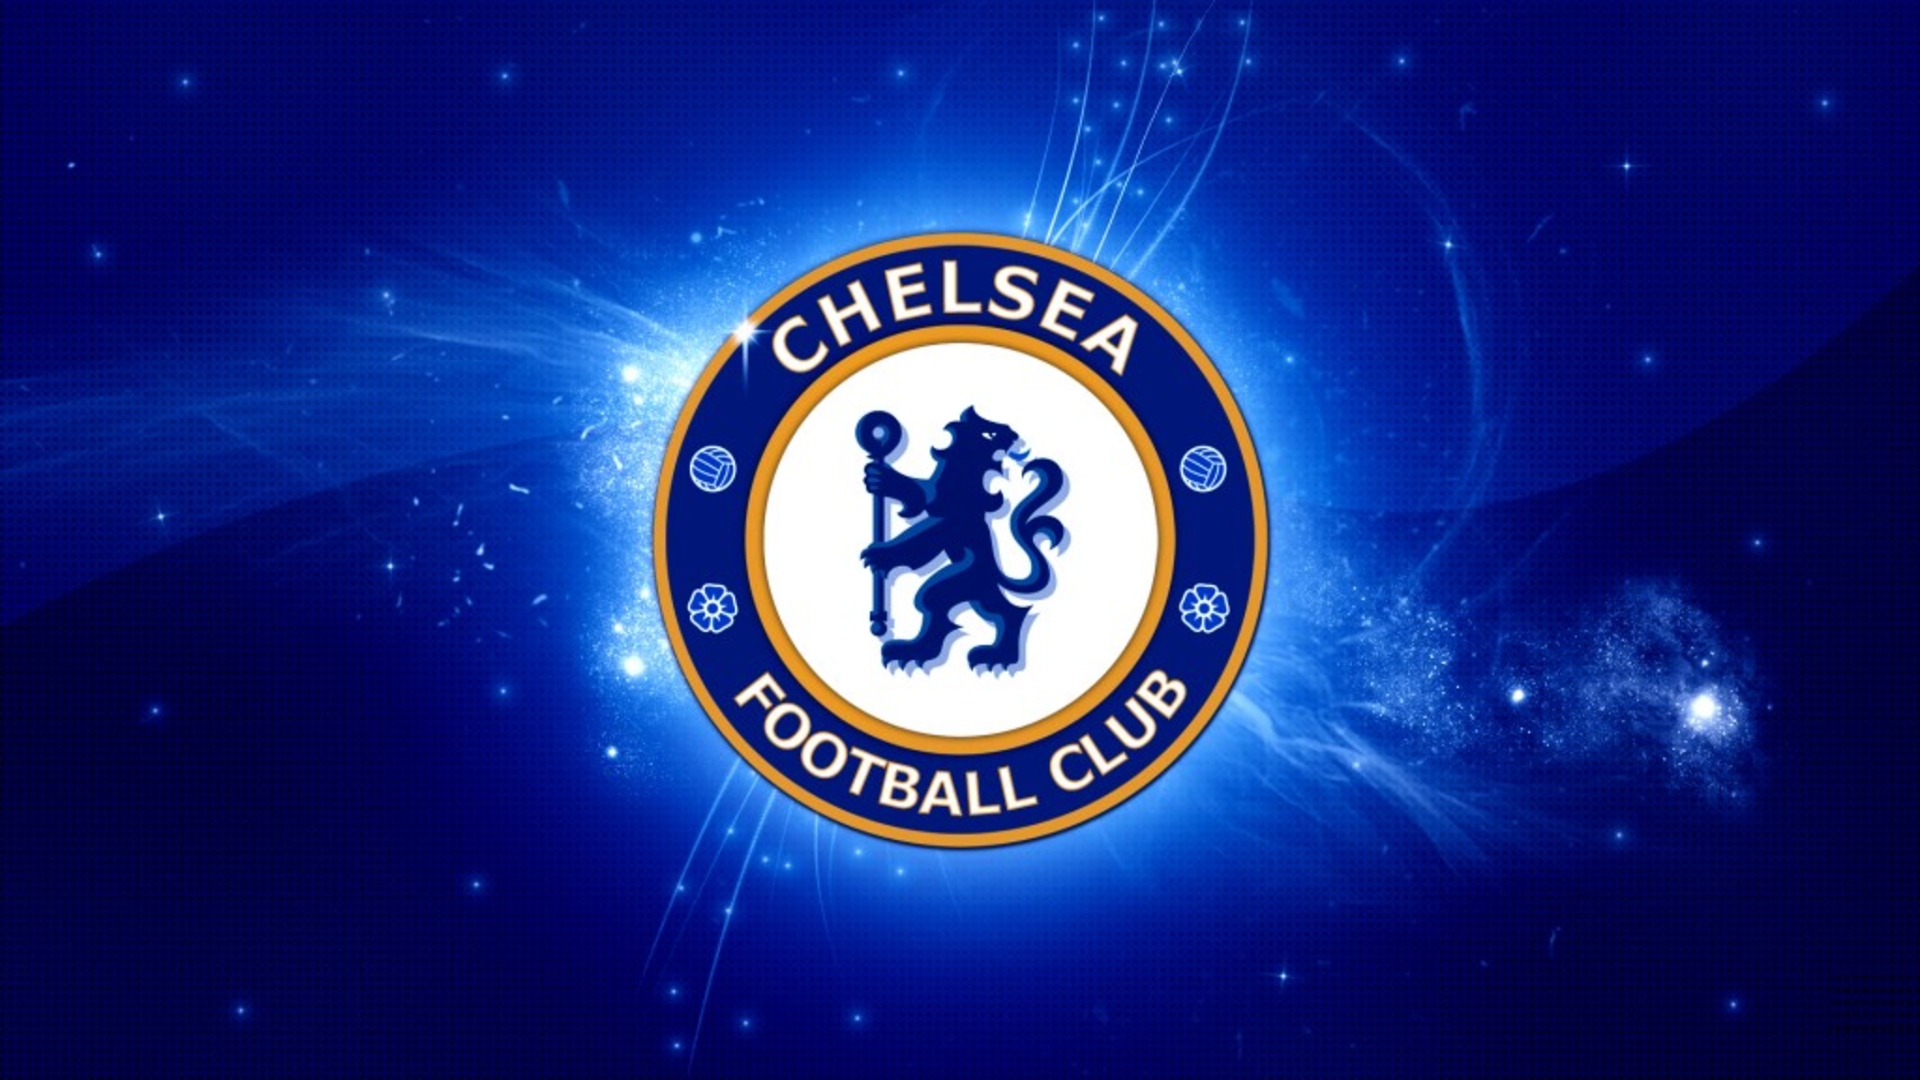 Football club Chelsea logo wallpapers and images  wallpapers 